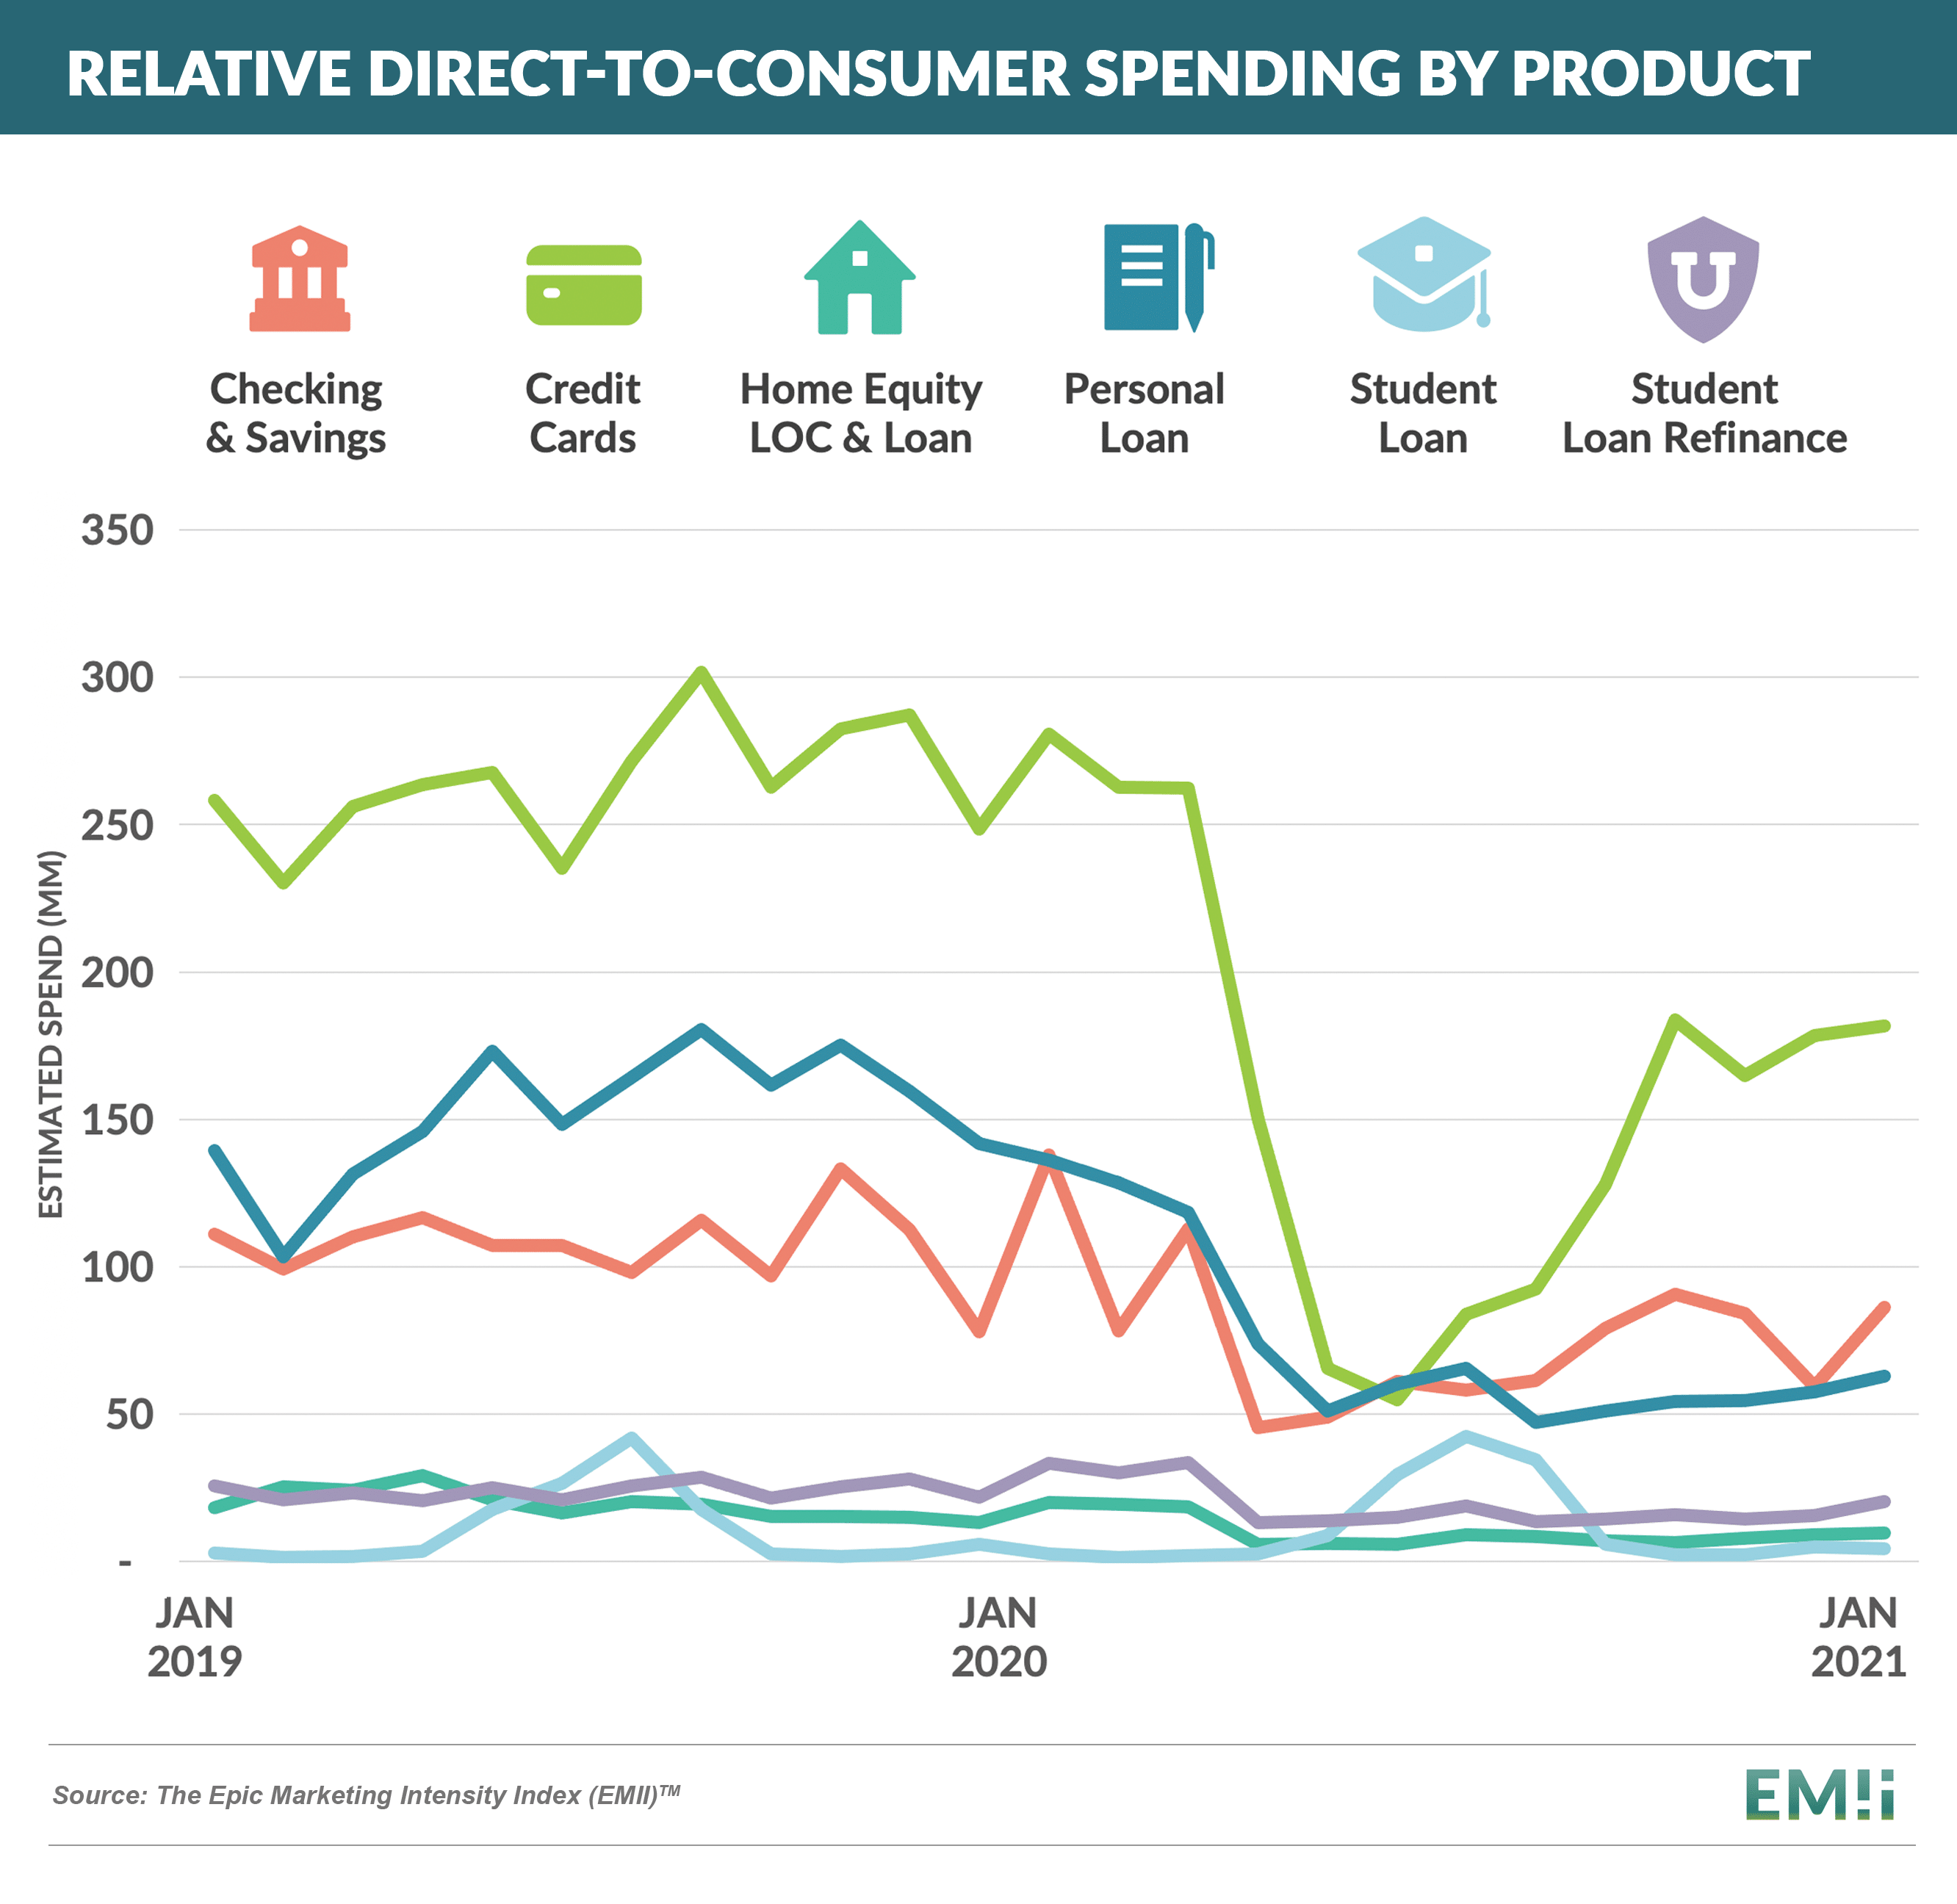 EMII - Relative Direct-to-Consumer Spending by Product JAN19-JAN21